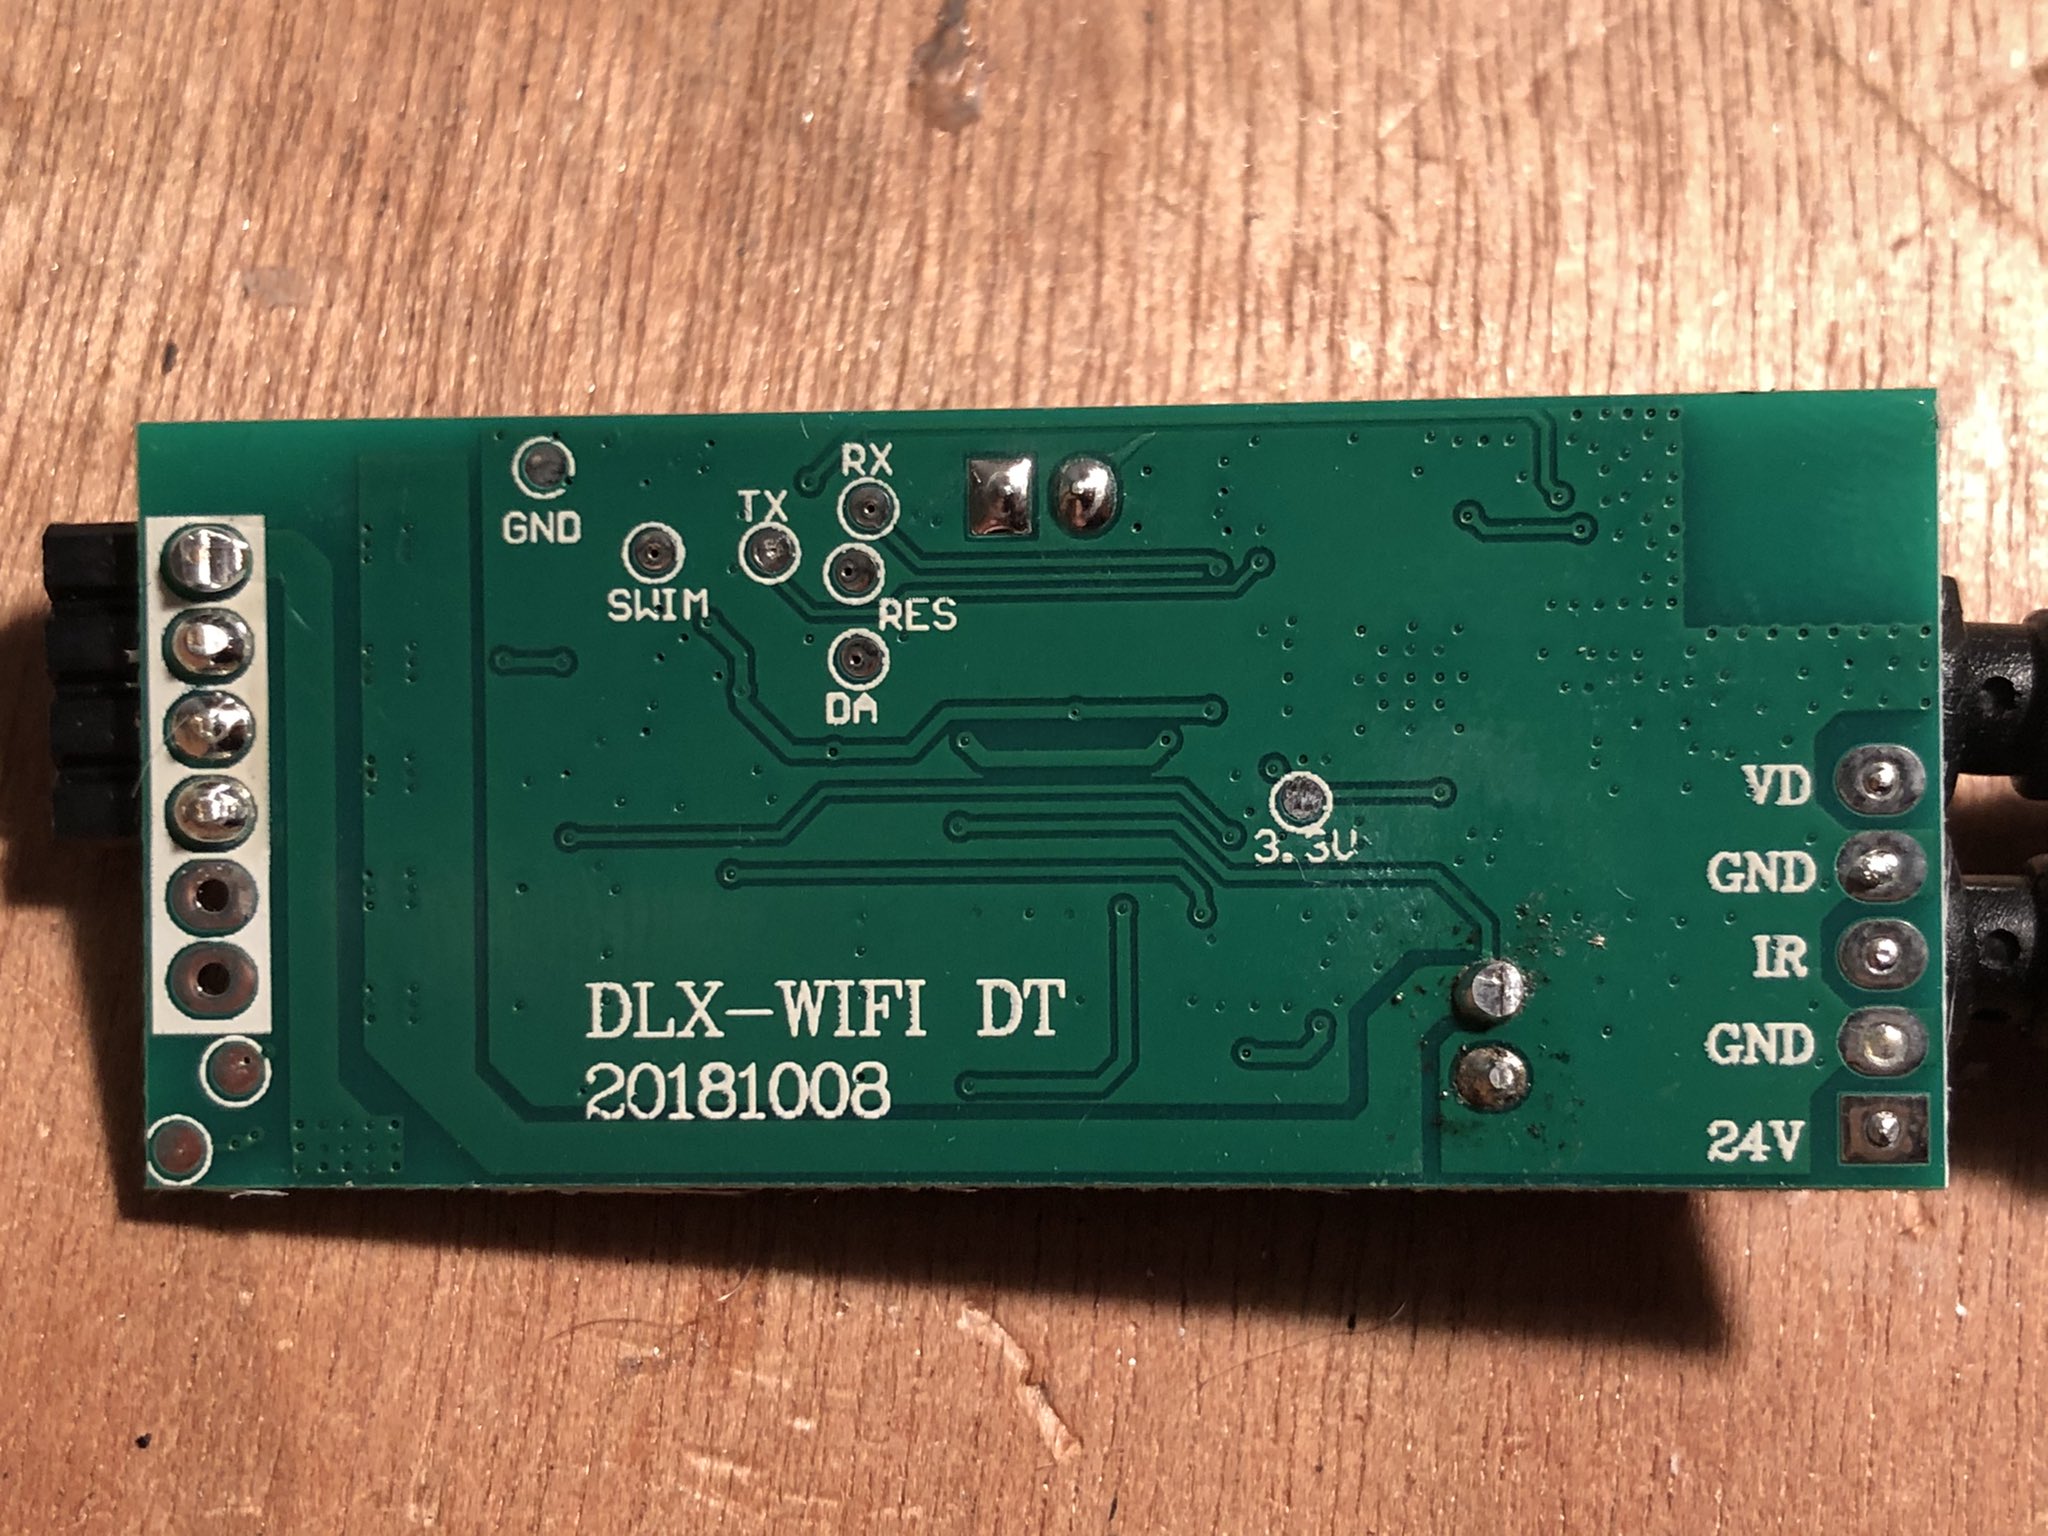 The back of the L1 PCB